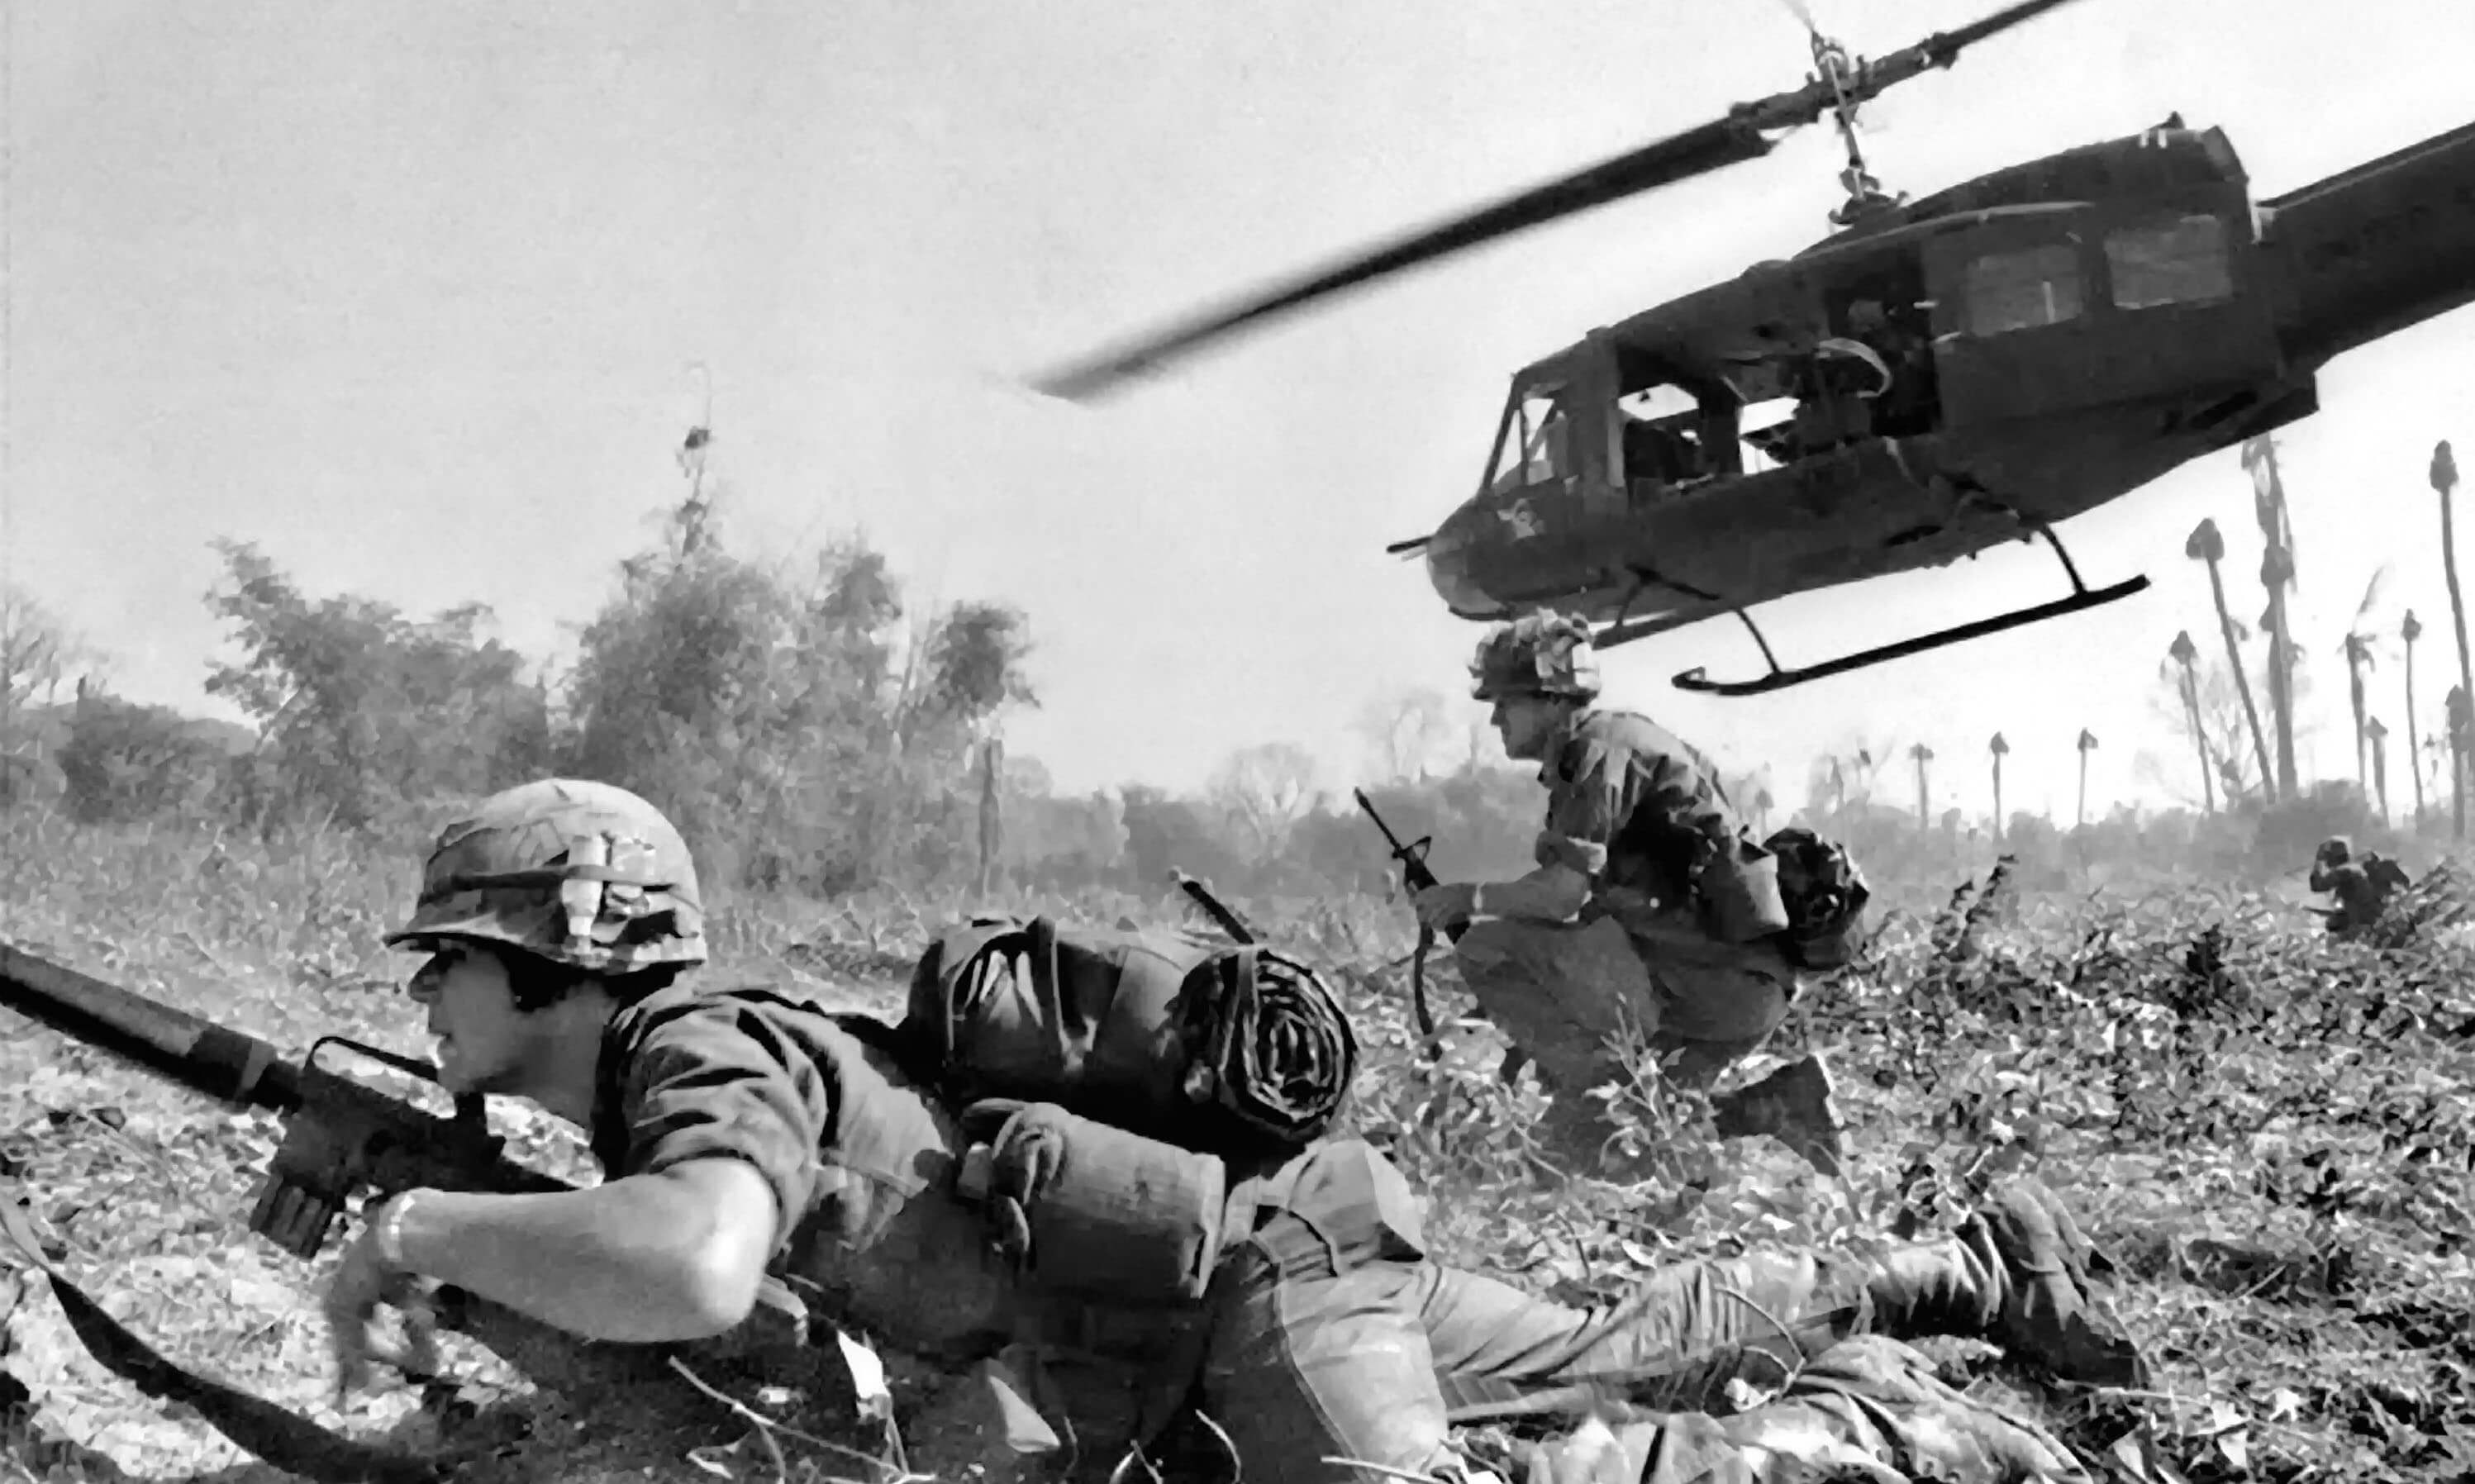 US Army Major Bruce Crandall flies his UH-1D helicopter after discharging a load of infantrymen on a search and destroy mission November 14, 1965 during the Battle of Ia Drang, Vietnam